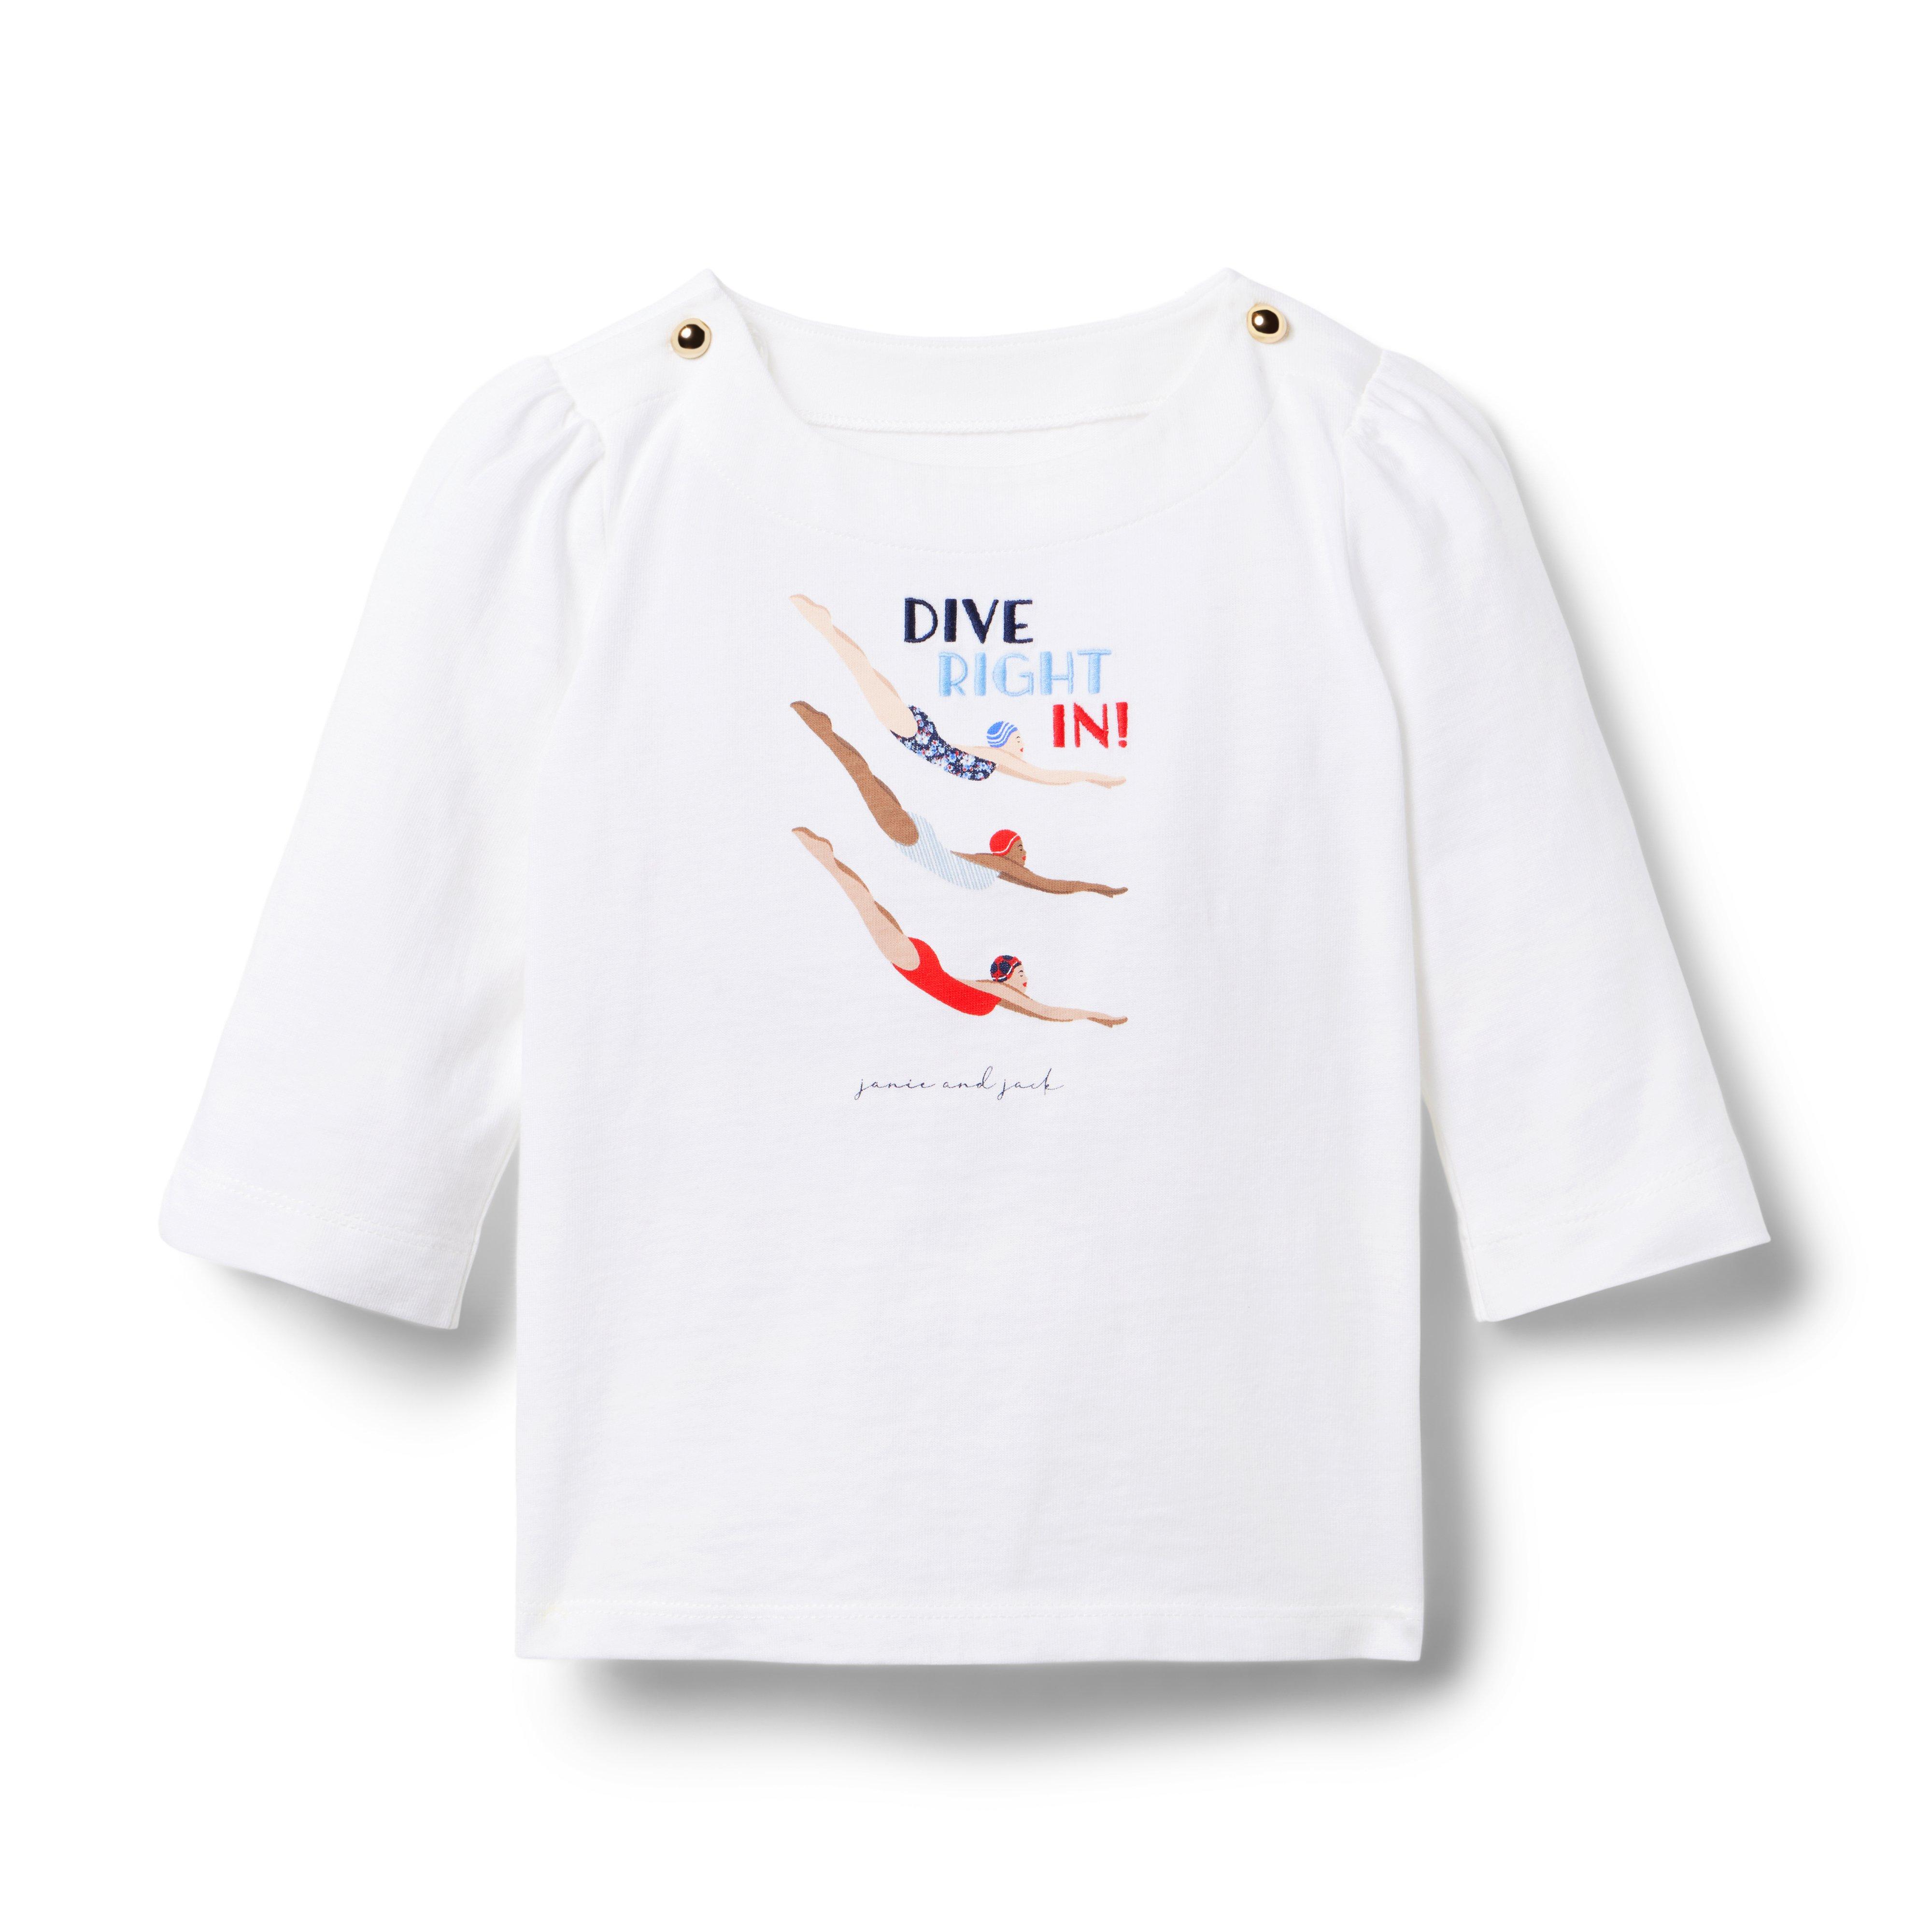 Dive Right Tee